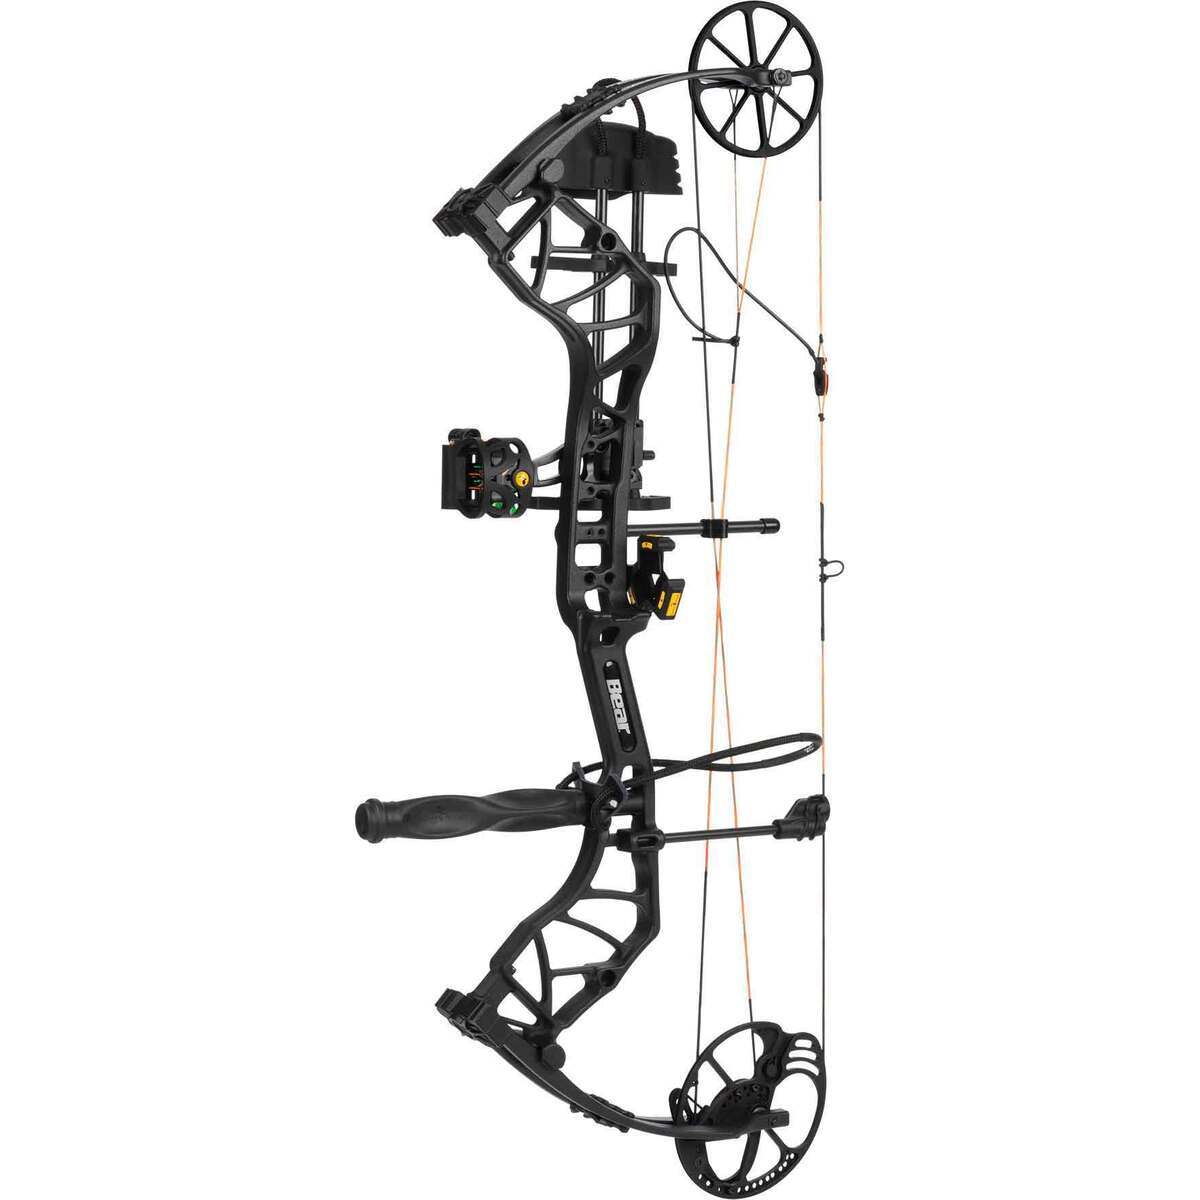 Bear Archery Species EV Ready To Hunt Adult Compound Bow, 52% OFF